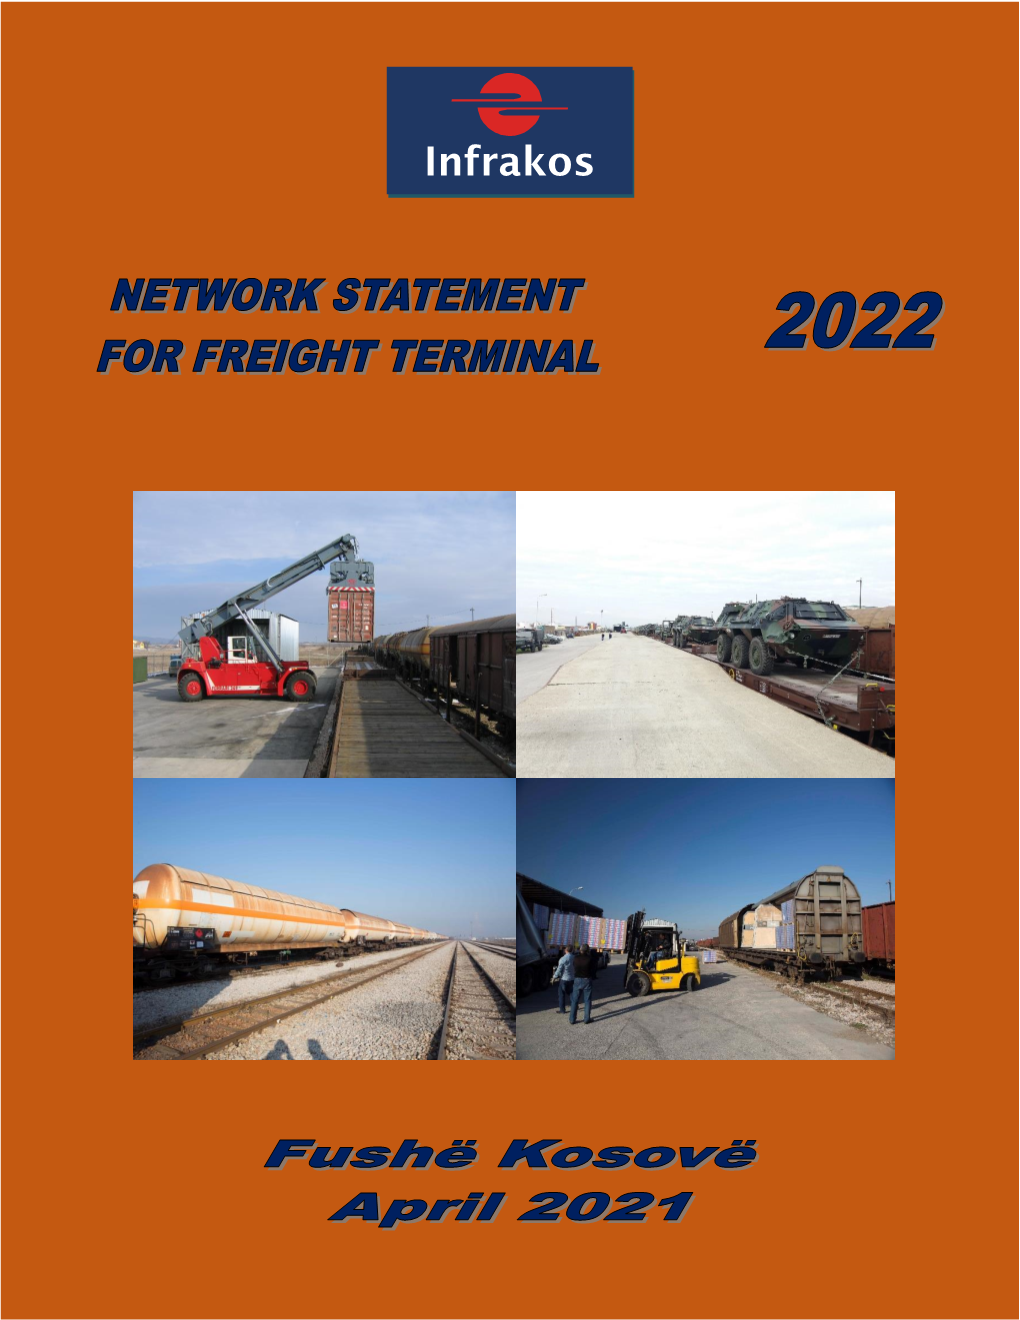 Network Statement for Freight Terminal 2022